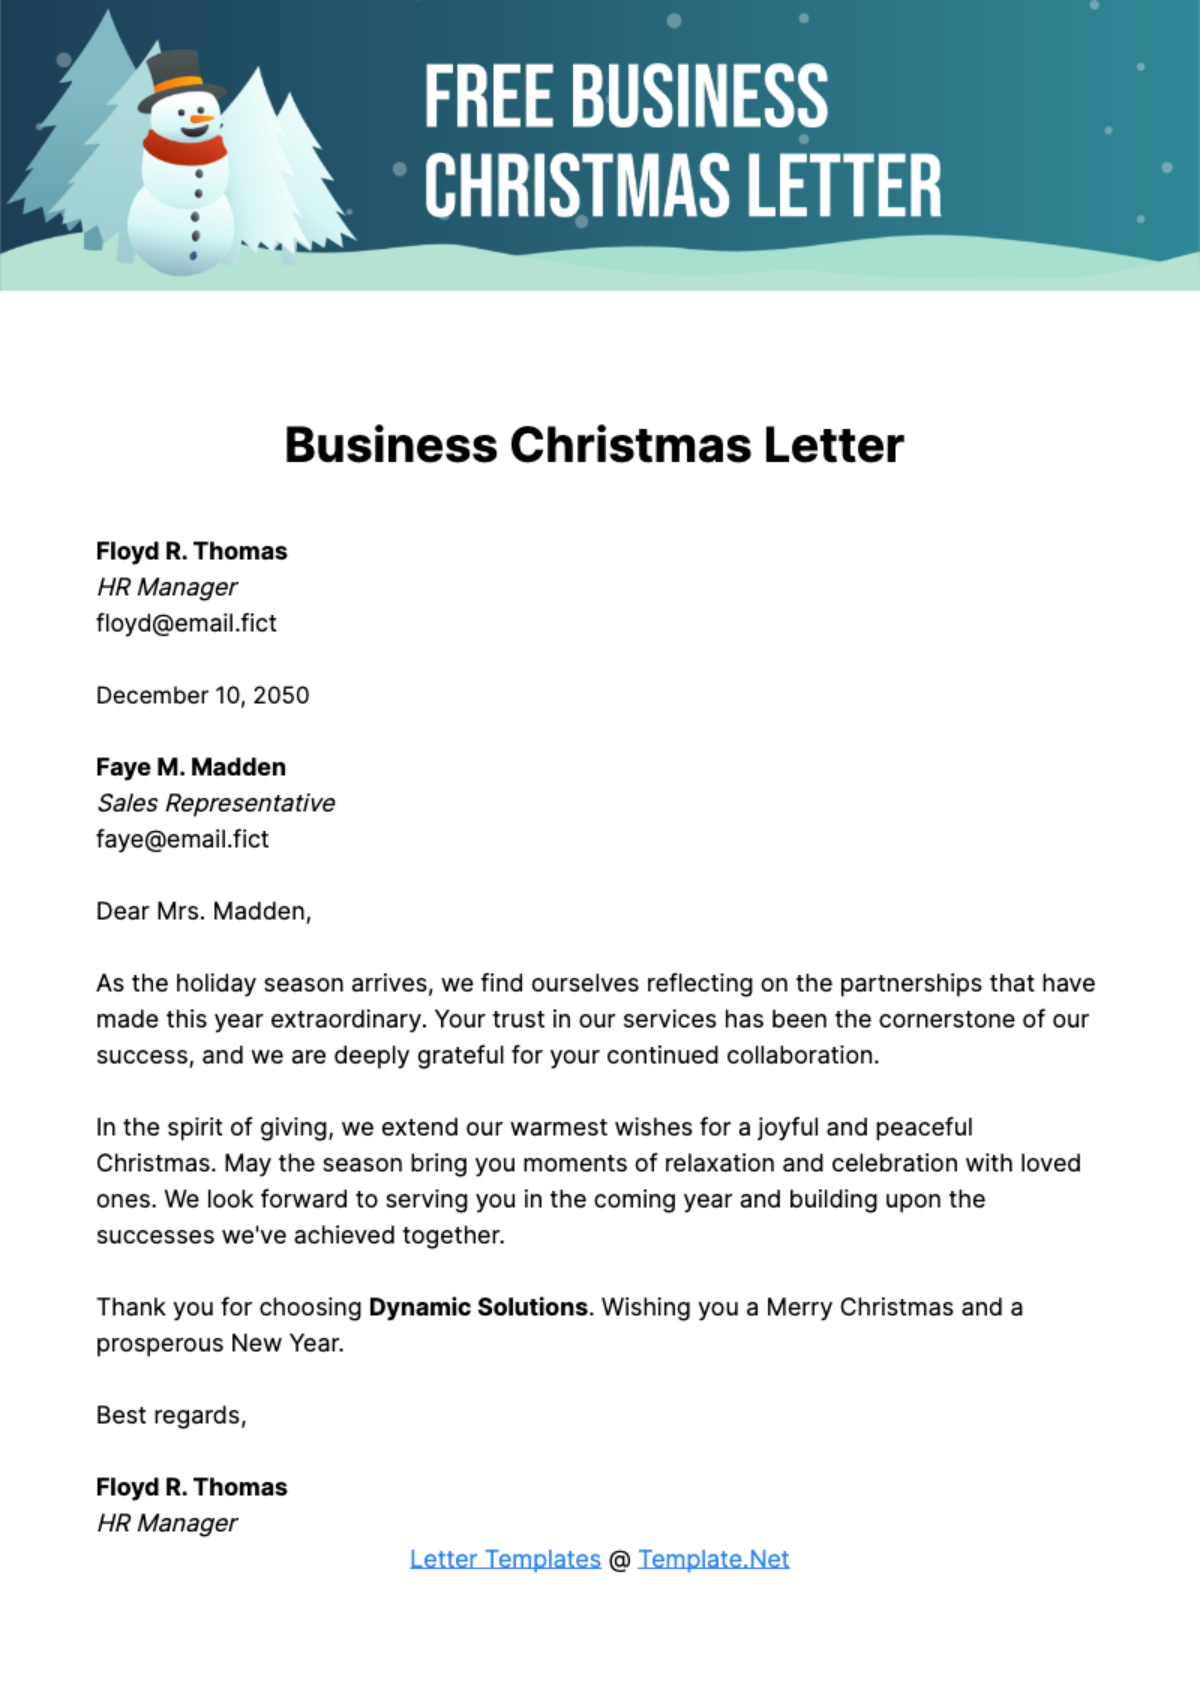 Free Business Christmas Letter Template